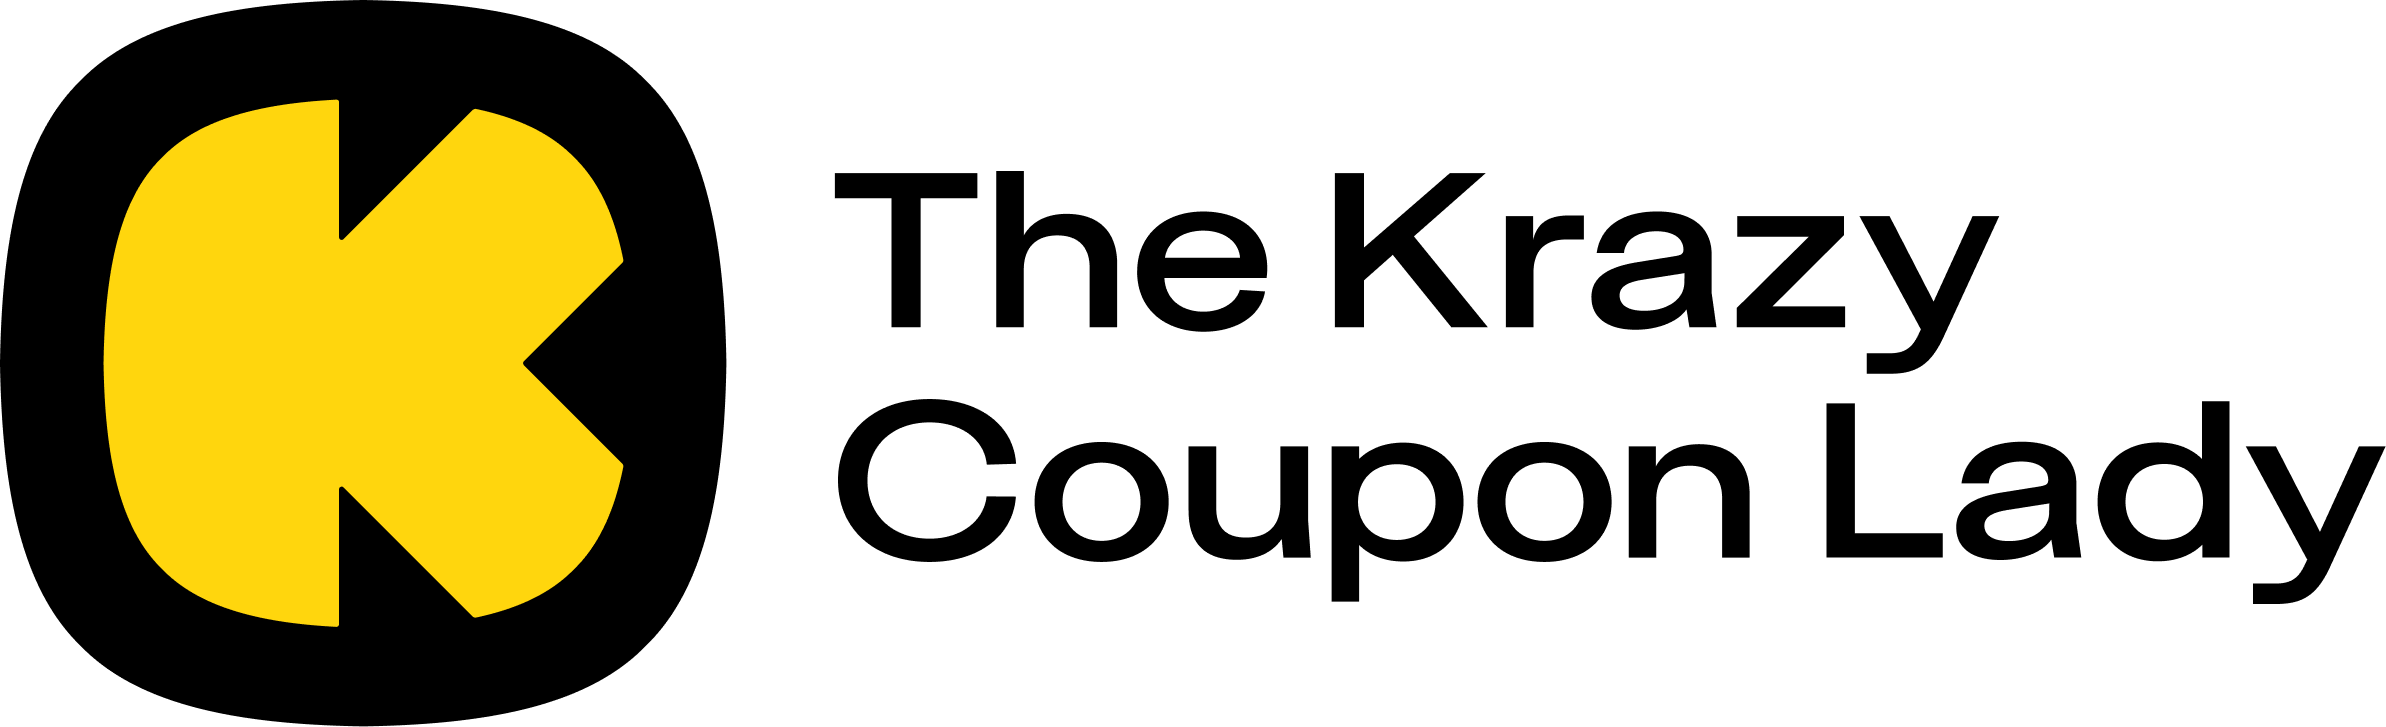 Michaels Storage Deal Event: Prices Start at $3, With Savings Up to 64% -  The Krazy Coupon Lady